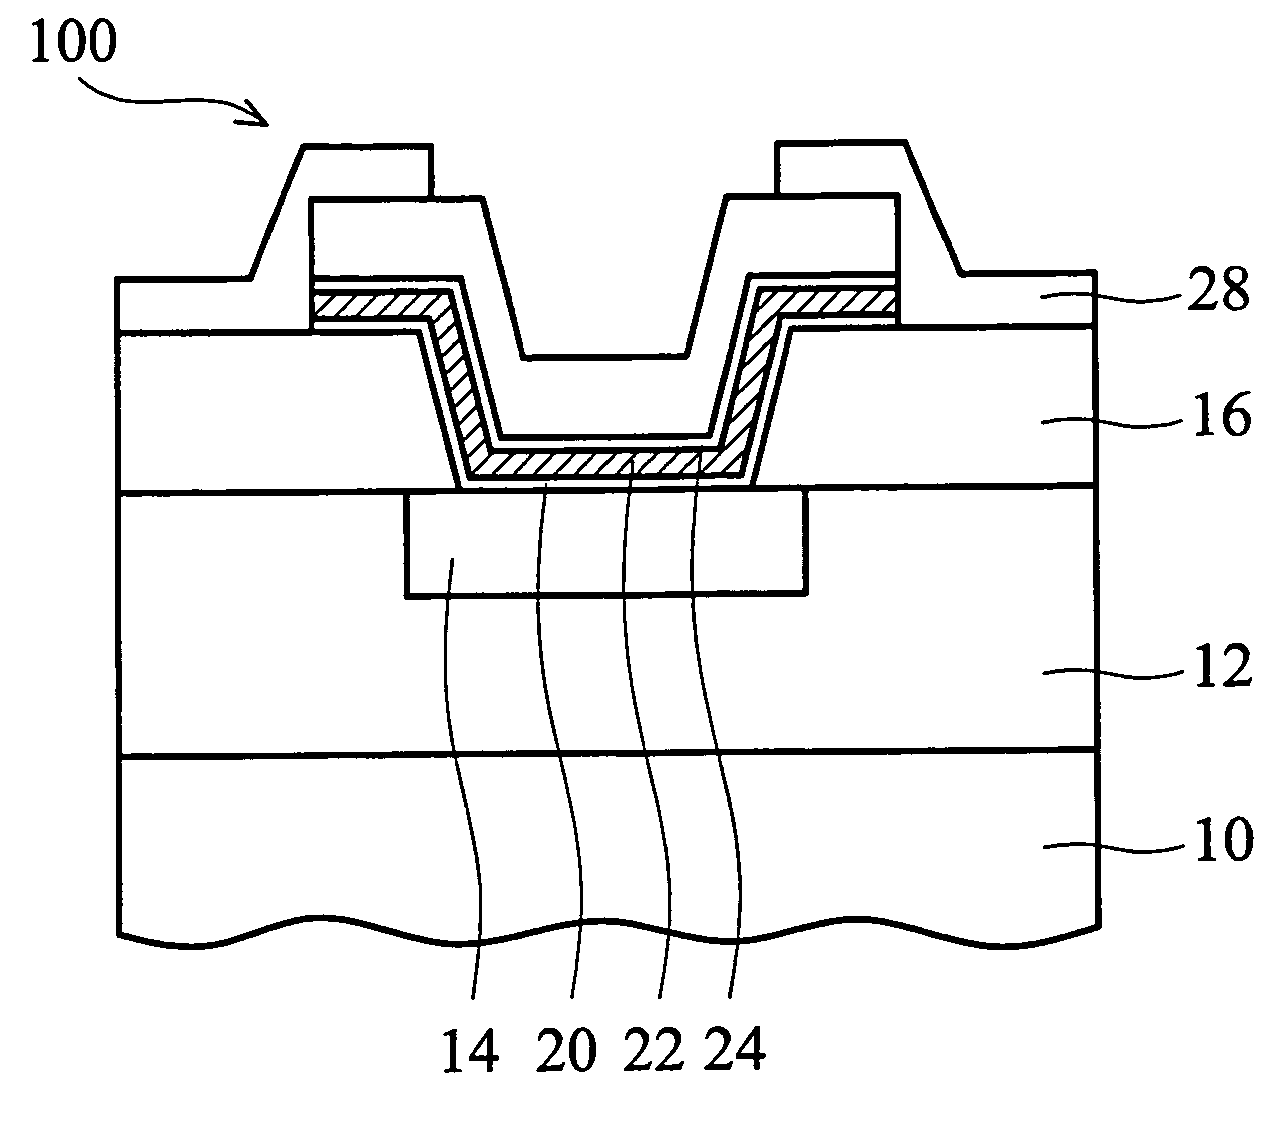 Bond pad structure with stress-buffering layer capping interconnection metal layer